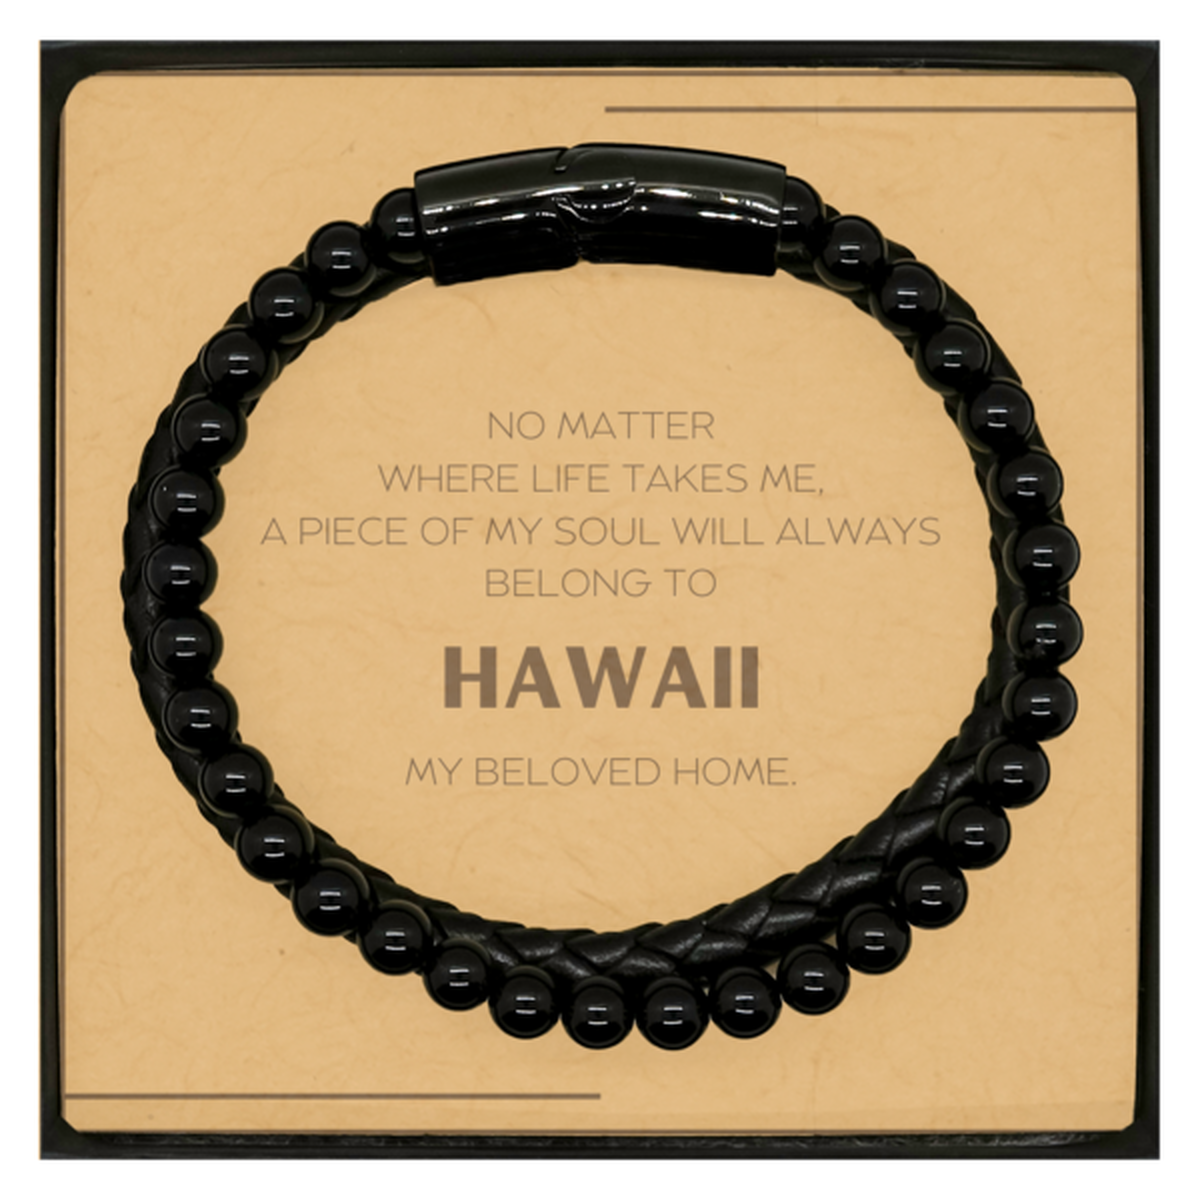 Love Hawaii State Gifts, My soul will always belong to Hawaii, Proud Stone Leather Bracelets, Birthday Christmas Unique Gifts For Hawaii Men, Women, Friends